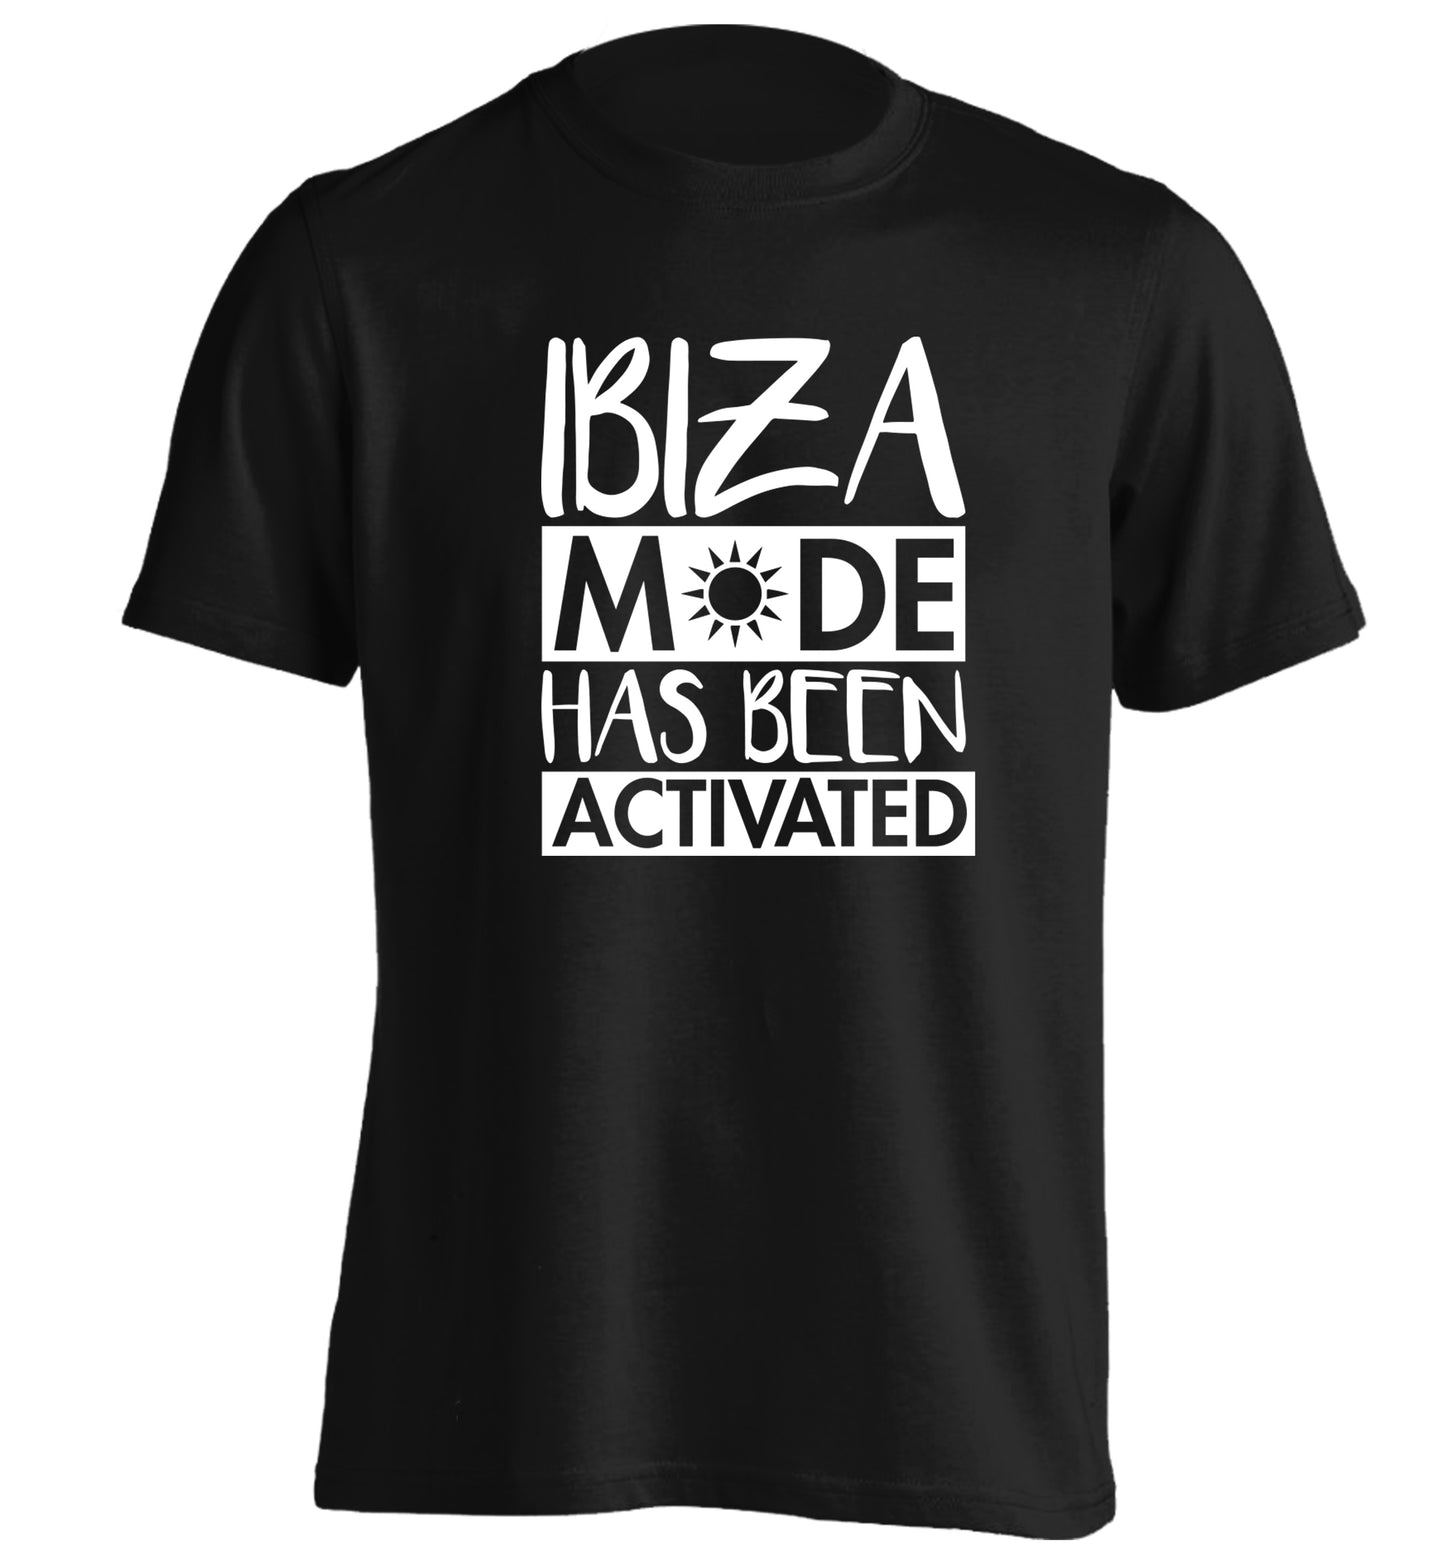 Ibiza mode has been activated adults unisex black Tshirt 2XL